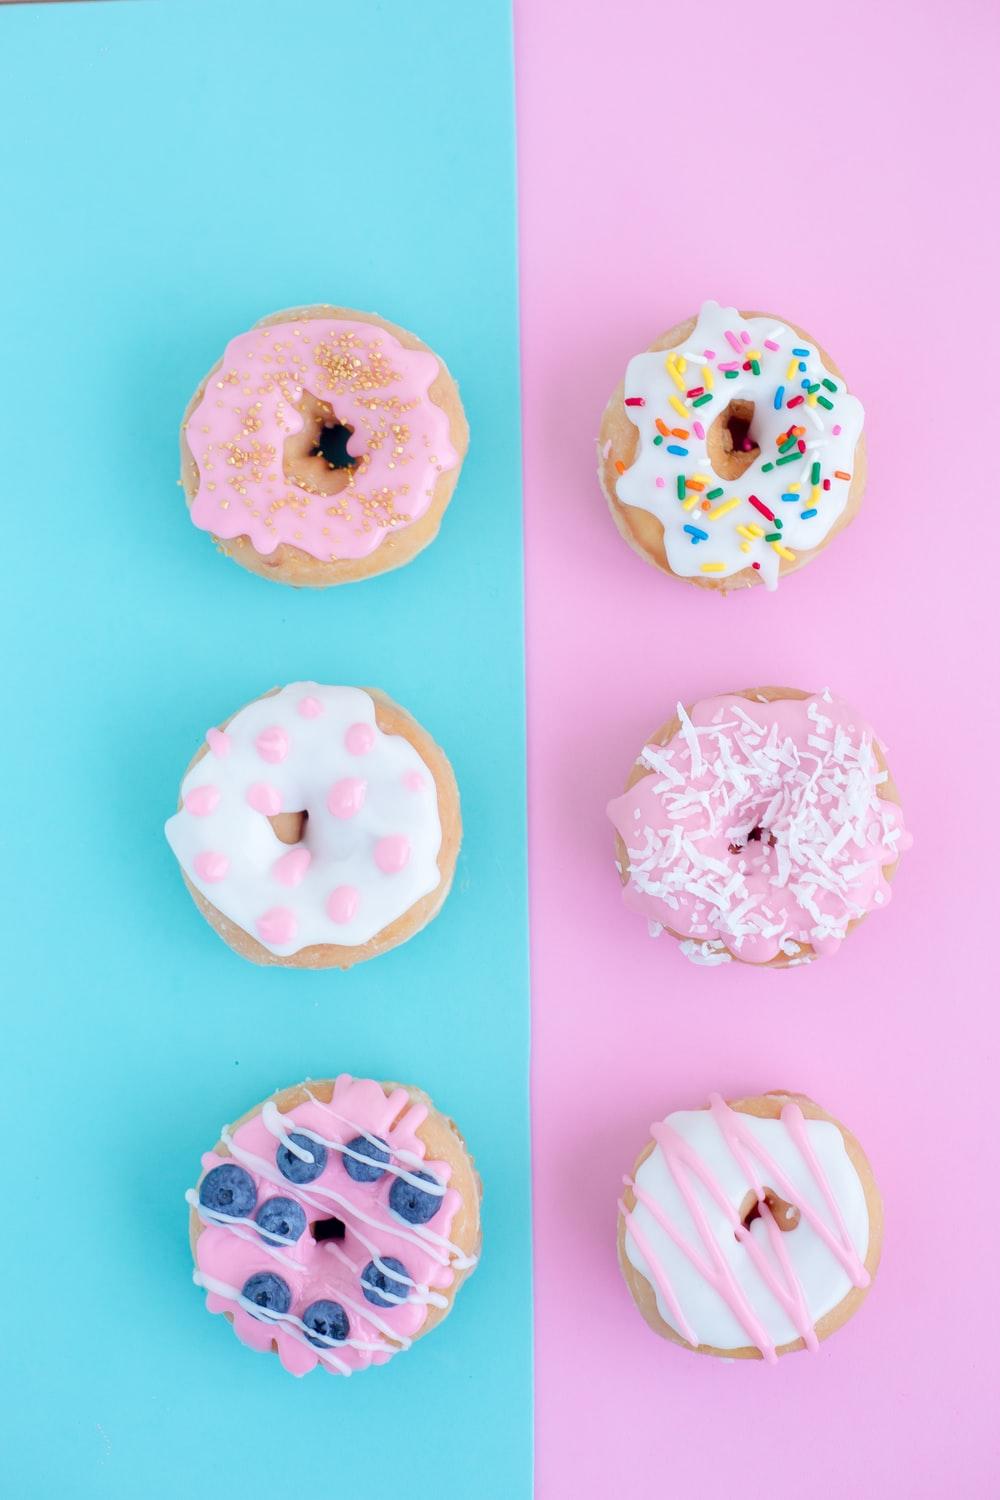 Donut Image: Download HD Picture & Photo